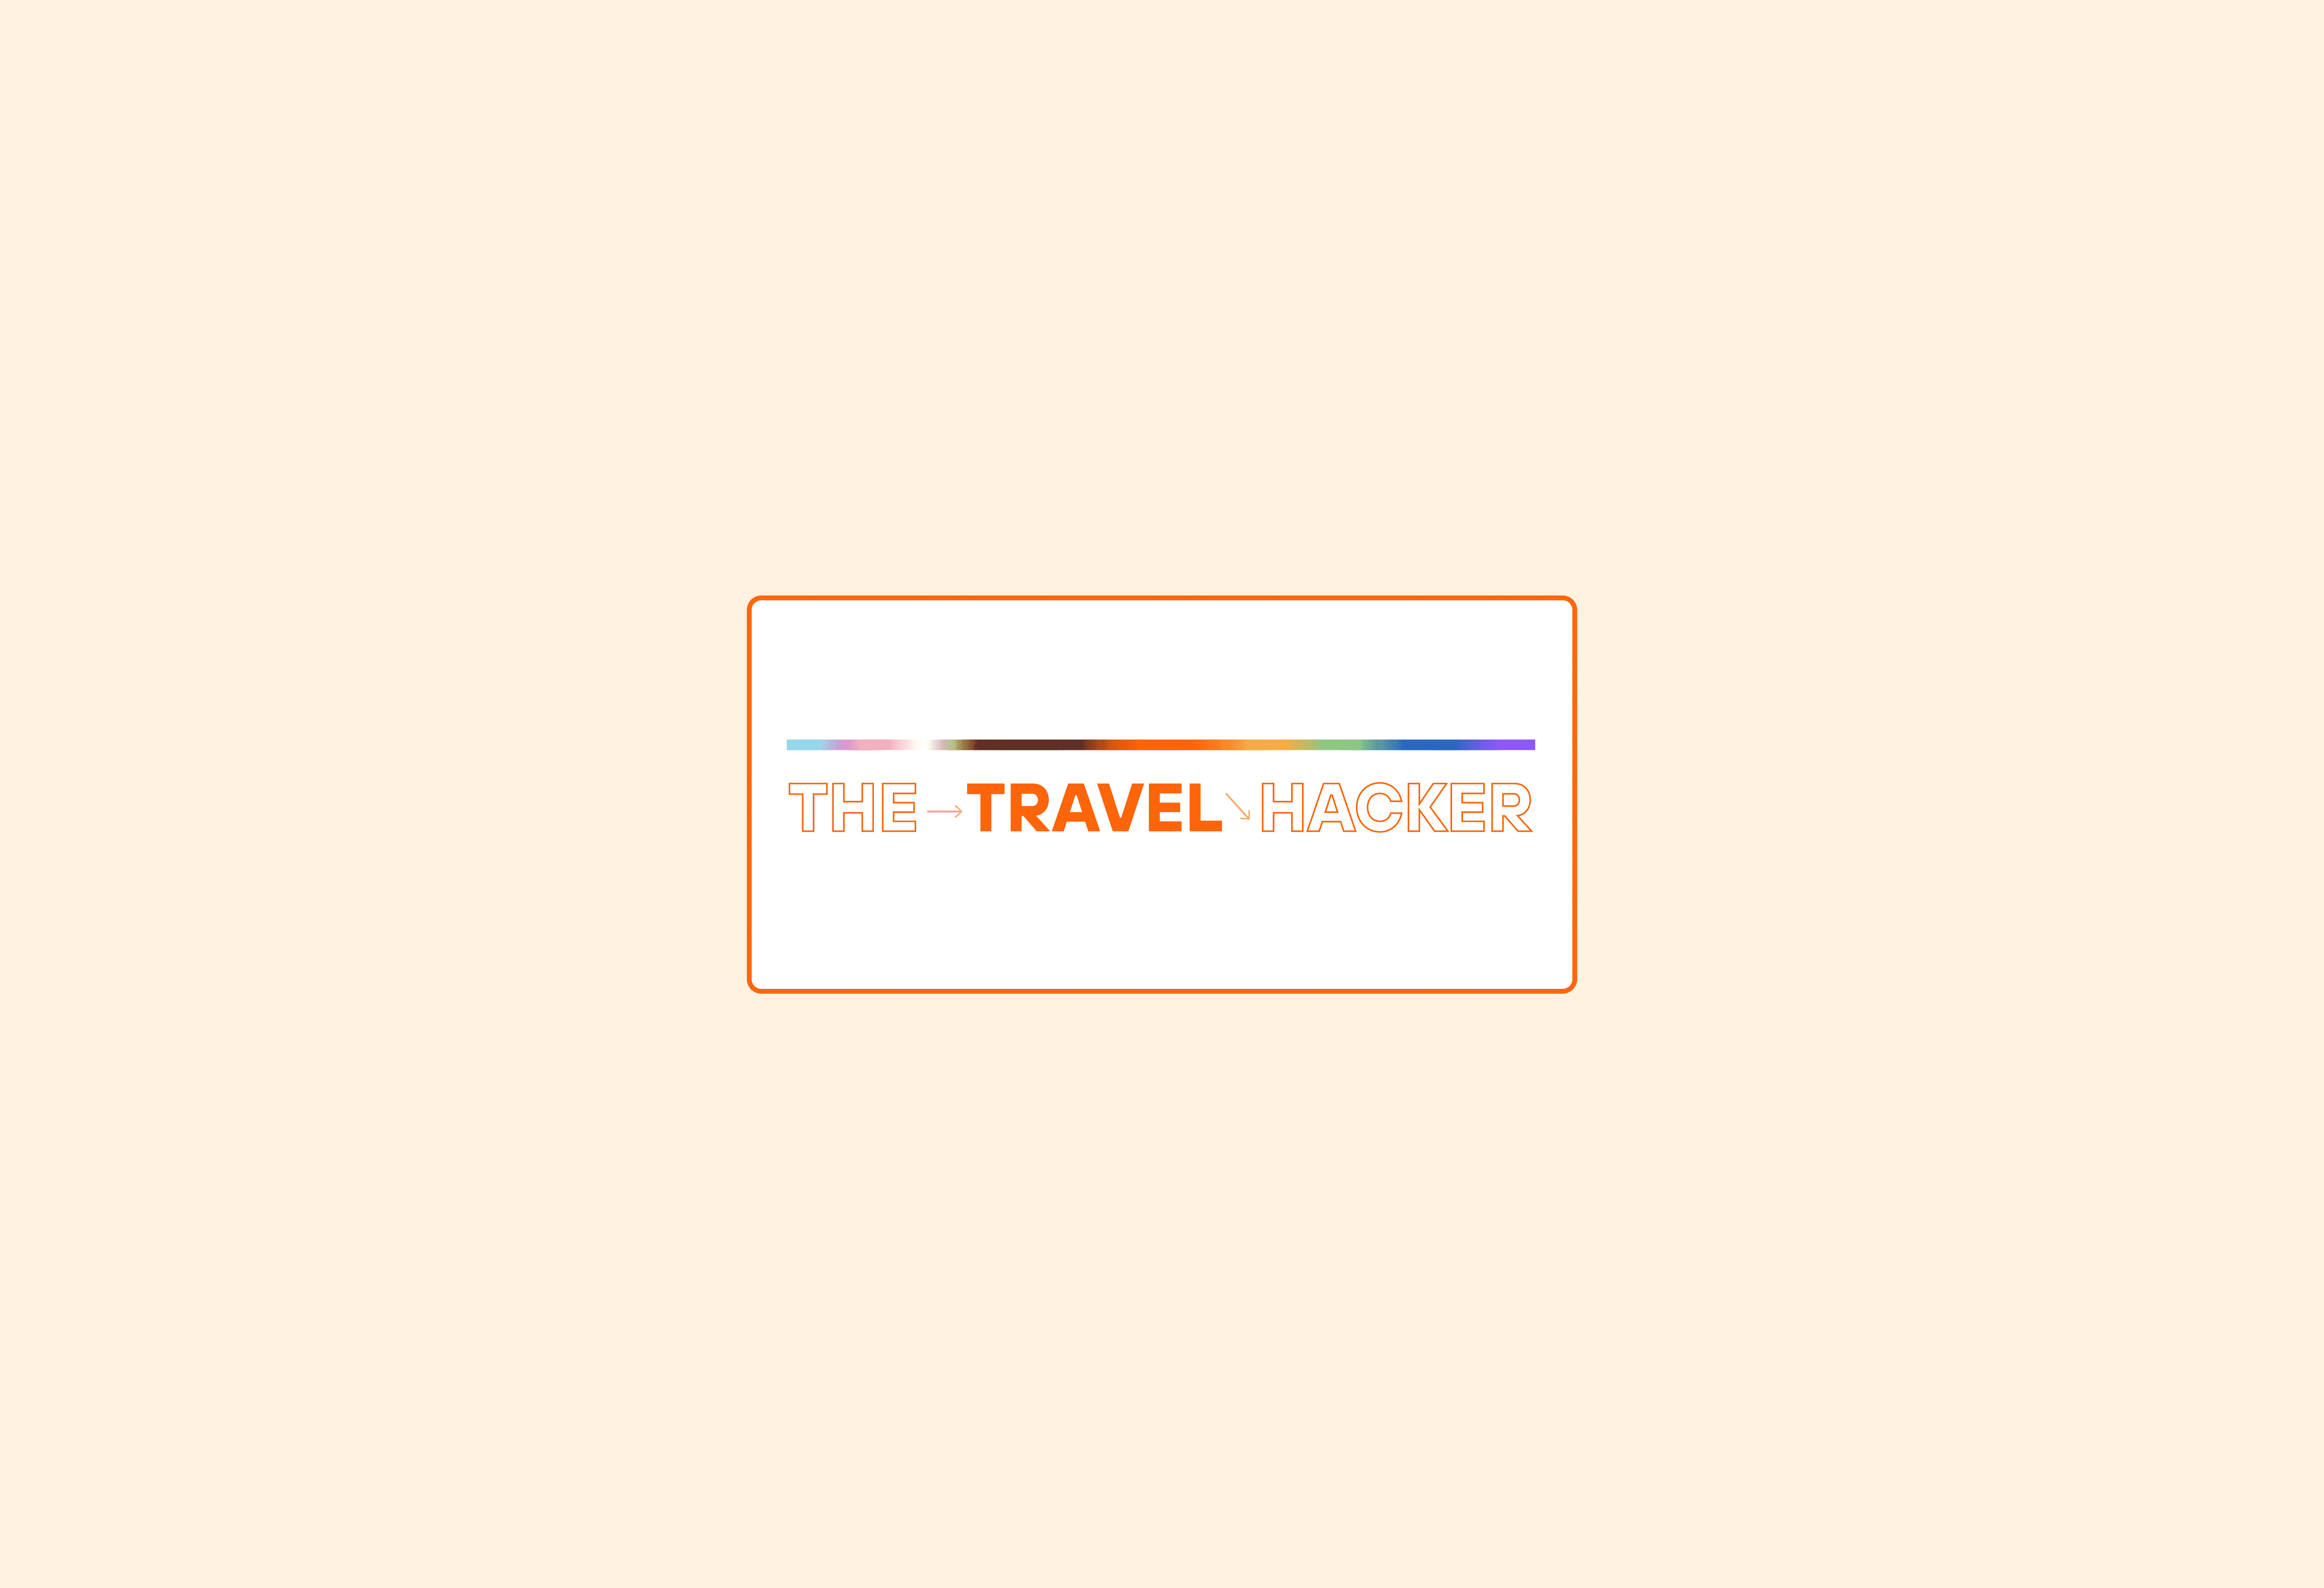 Text on an orange background with a rainbow line